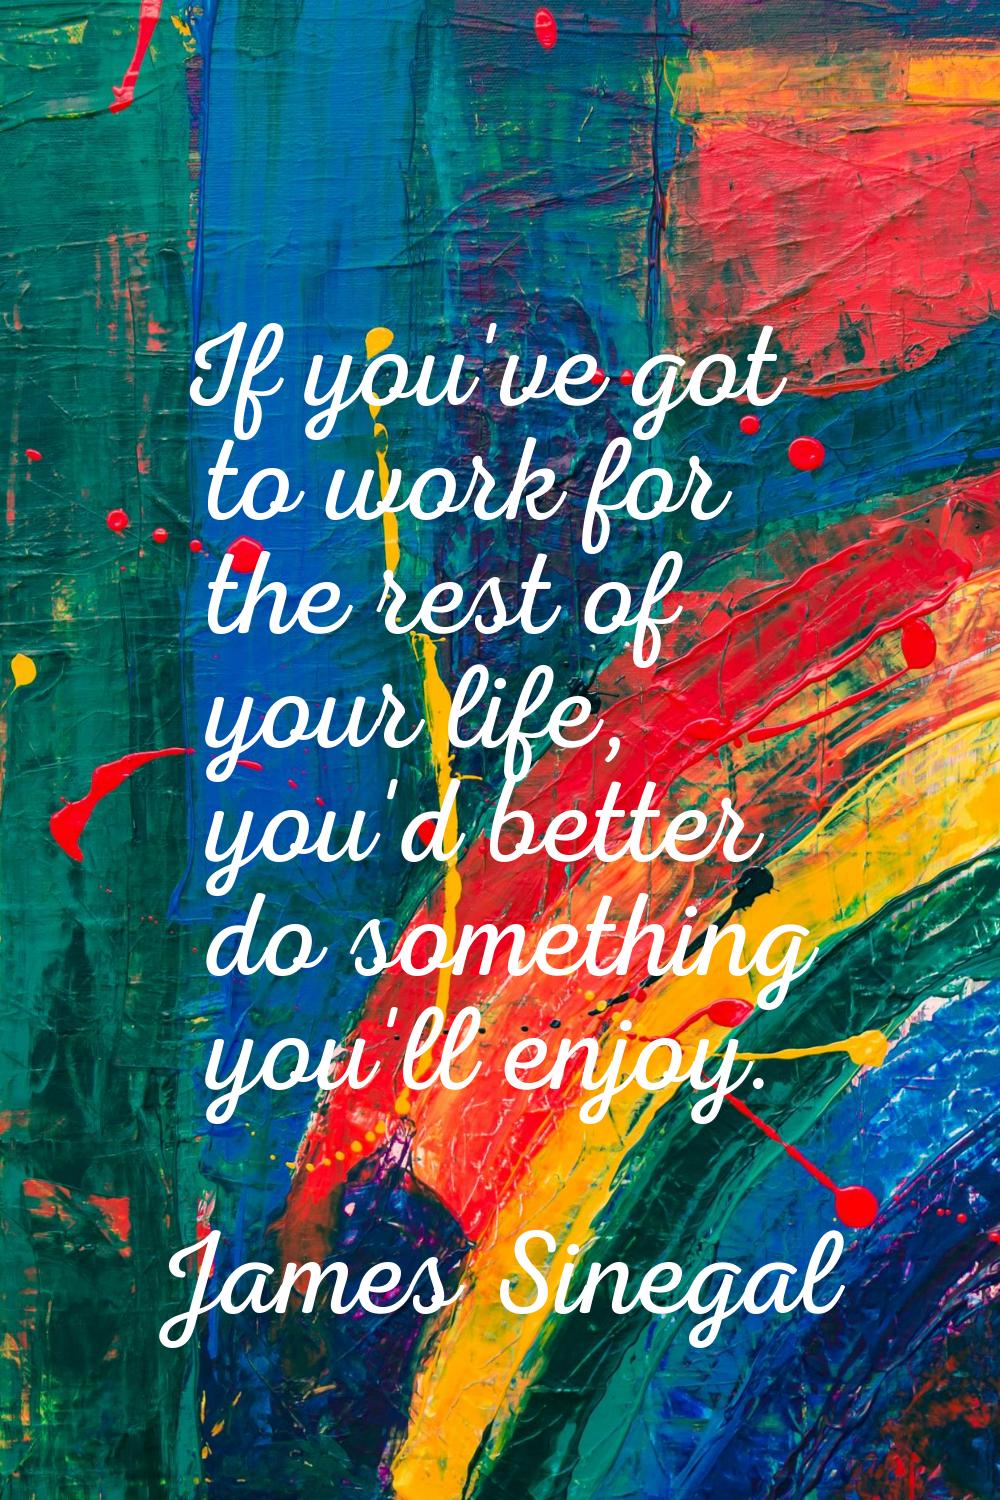 If you've got to work for the rest of your life, you'd better do something you'll enjoy.